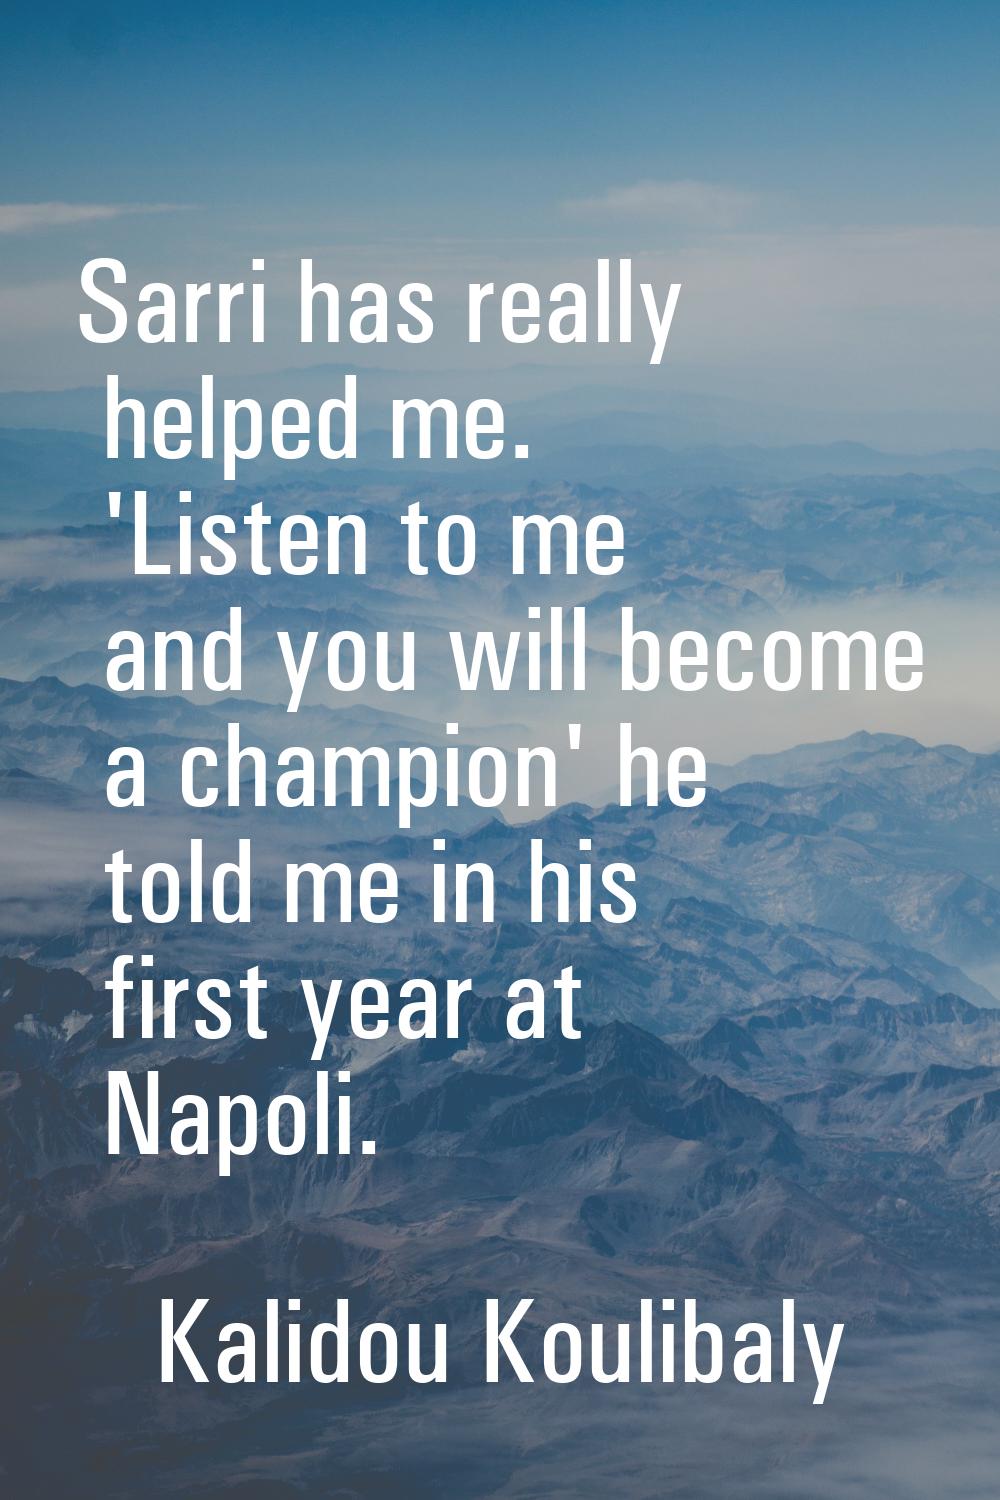 Sarri has really helped me. 'Listen to me and you will become a champion' he told me in his first y